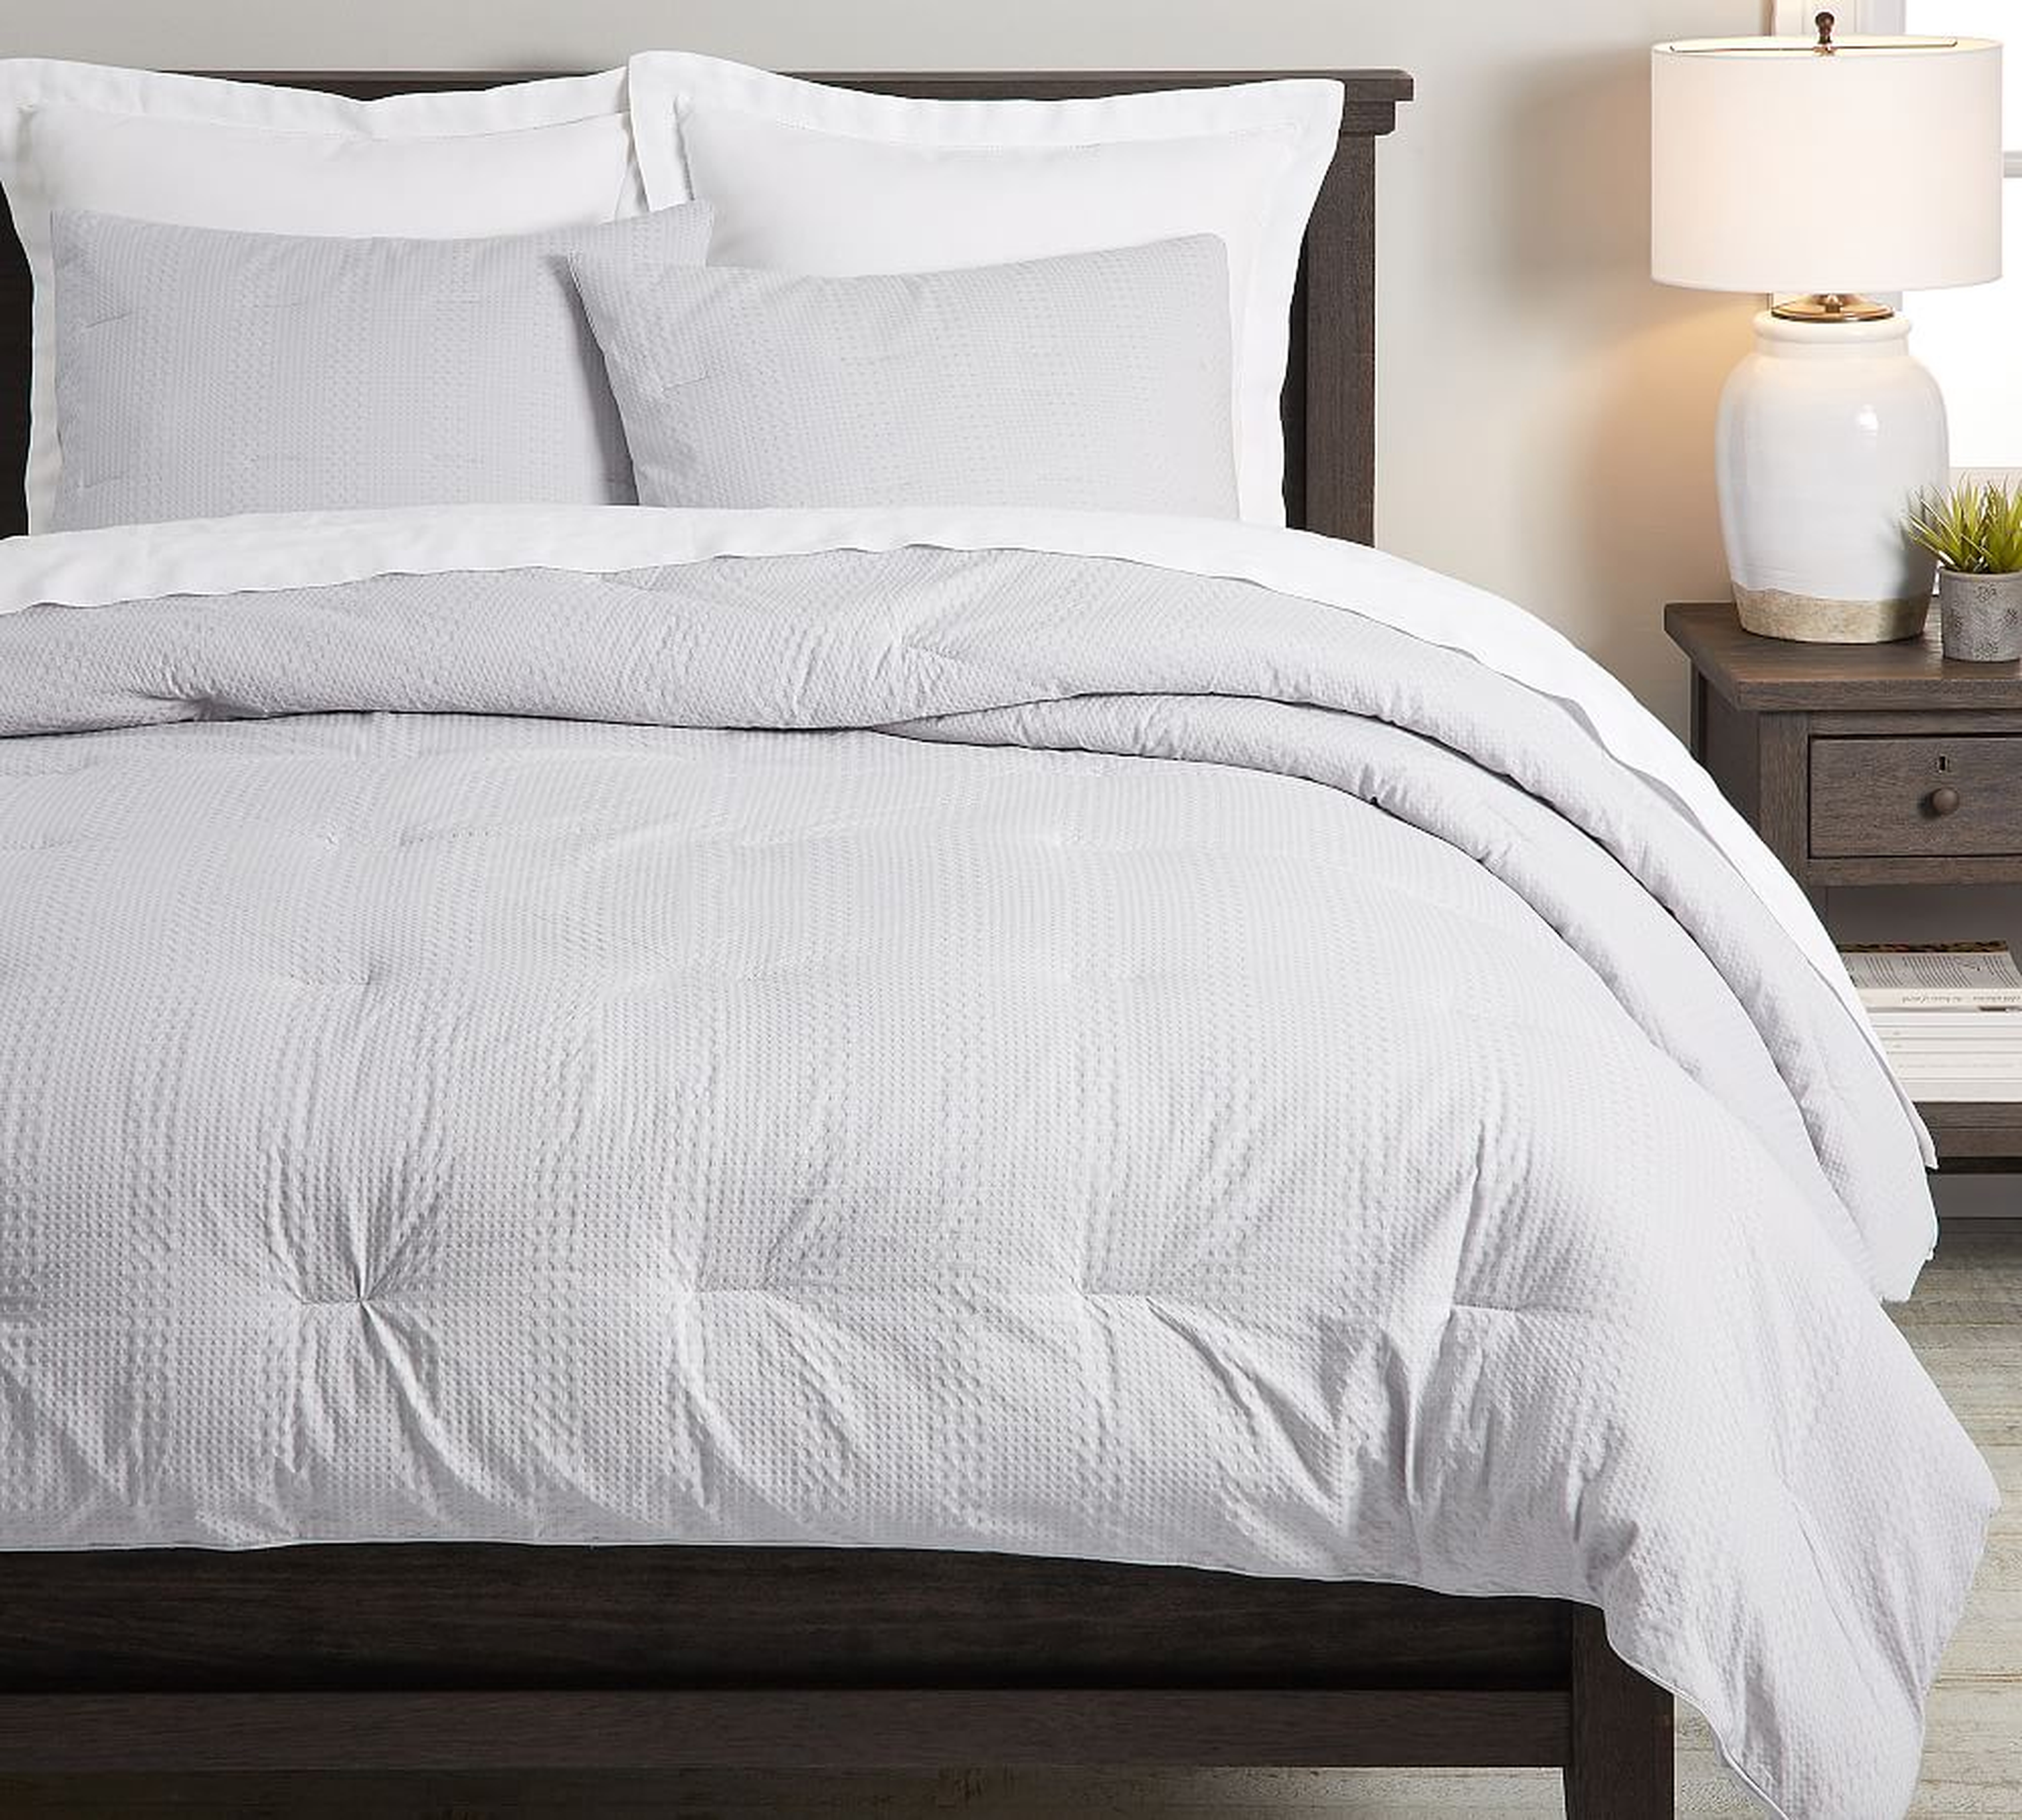 Waffle Weave Textured Organic Percale Comforter, Full/Queen, Gray Mist - Pottery Barn